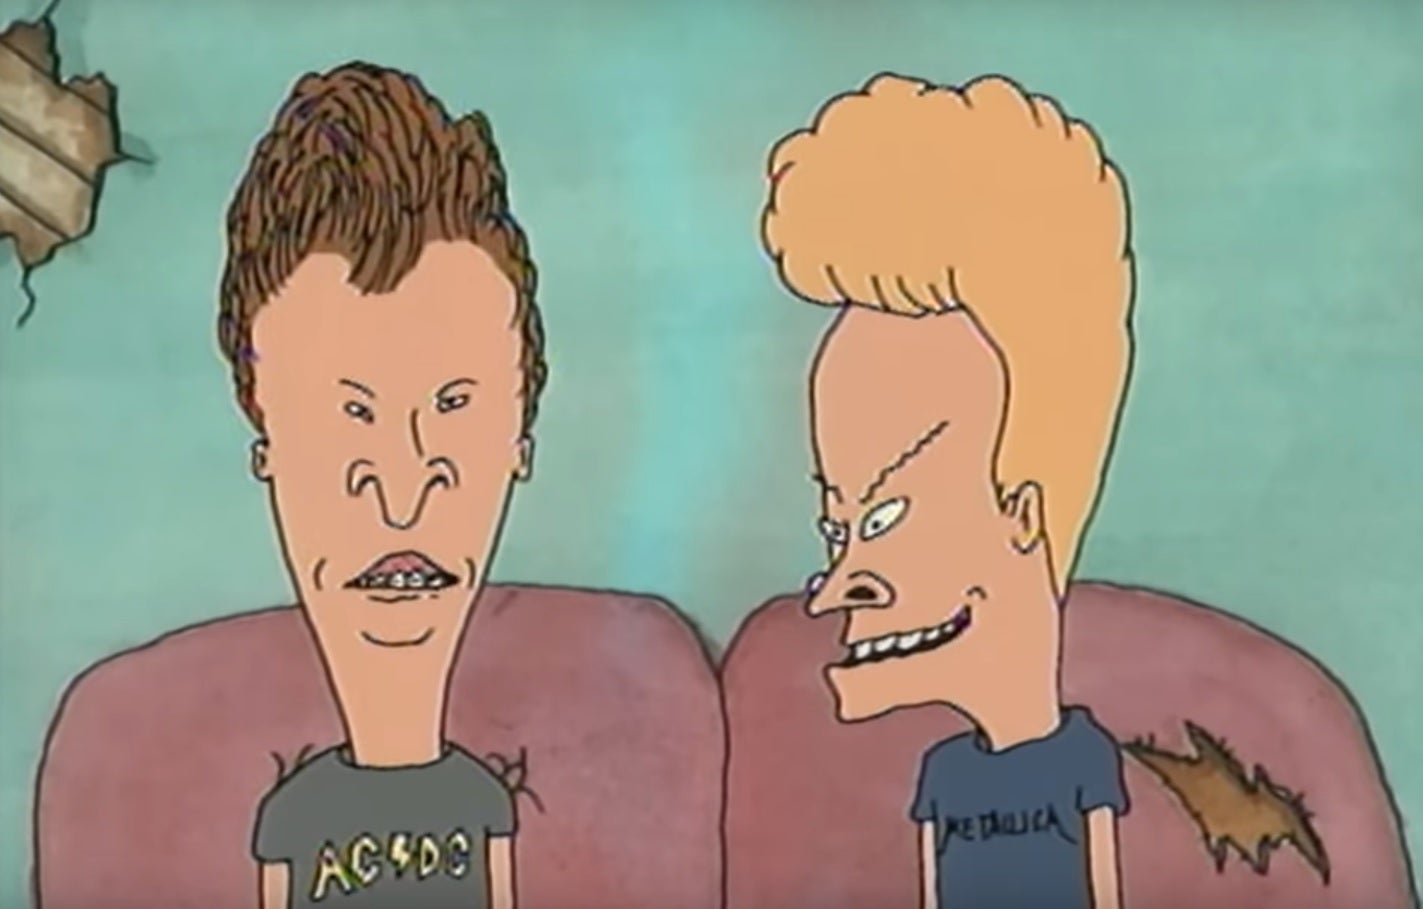 Beavis And Butt Head Return Just So They Can Make Fun Of Portugal The Man.